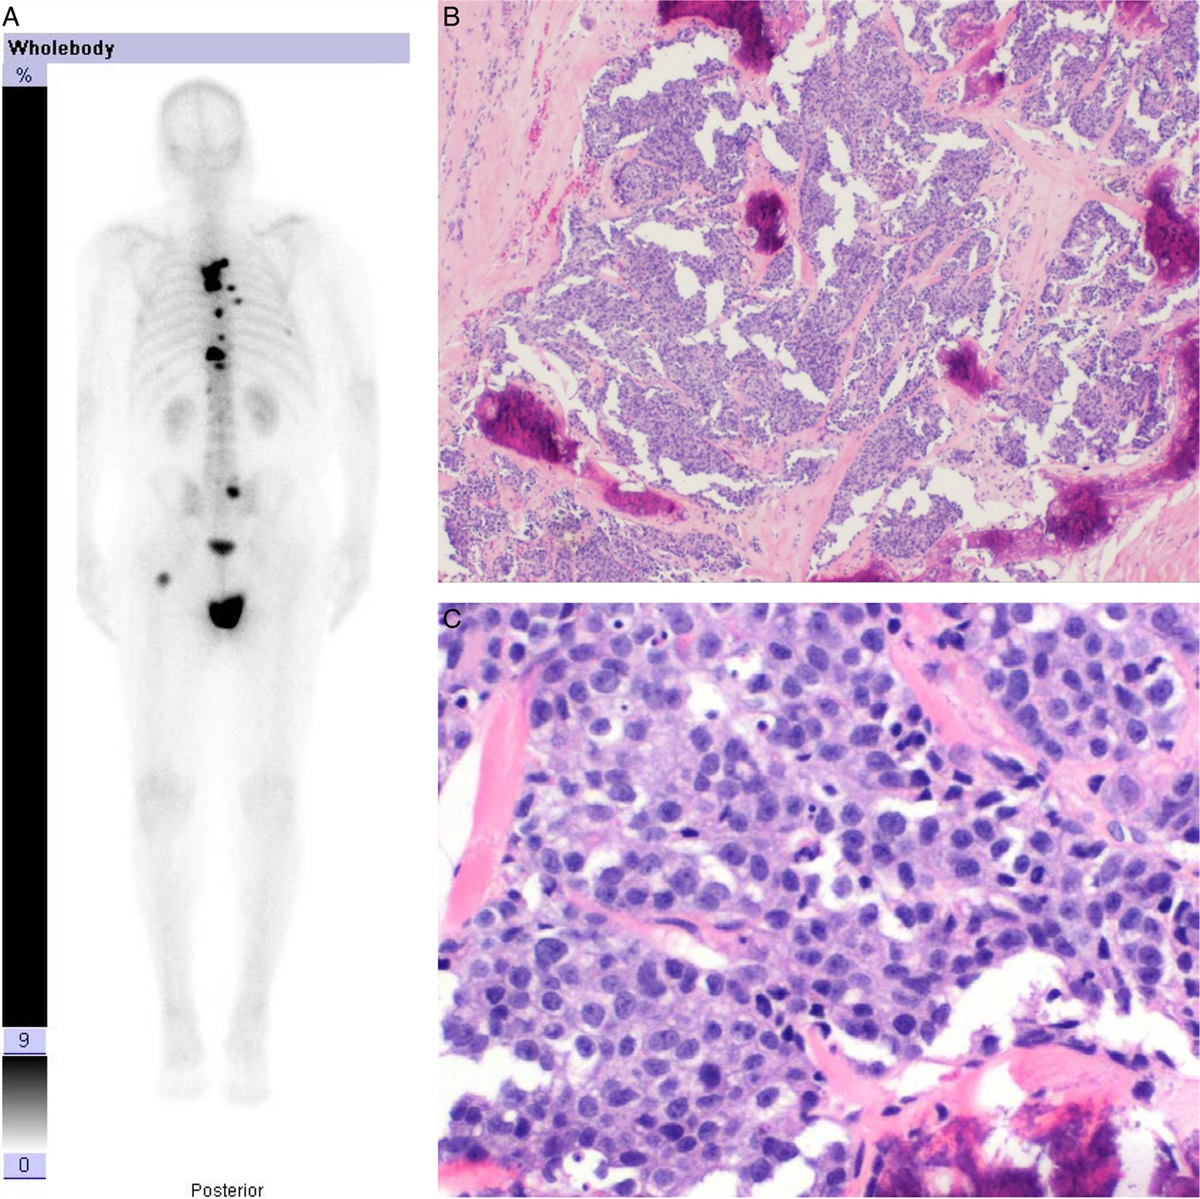 Contemporary Diagnostic Reporting for Prostatic Adenocarcinoma: Morphologic Aspects, Molecular Correlates, and Management Perspectives